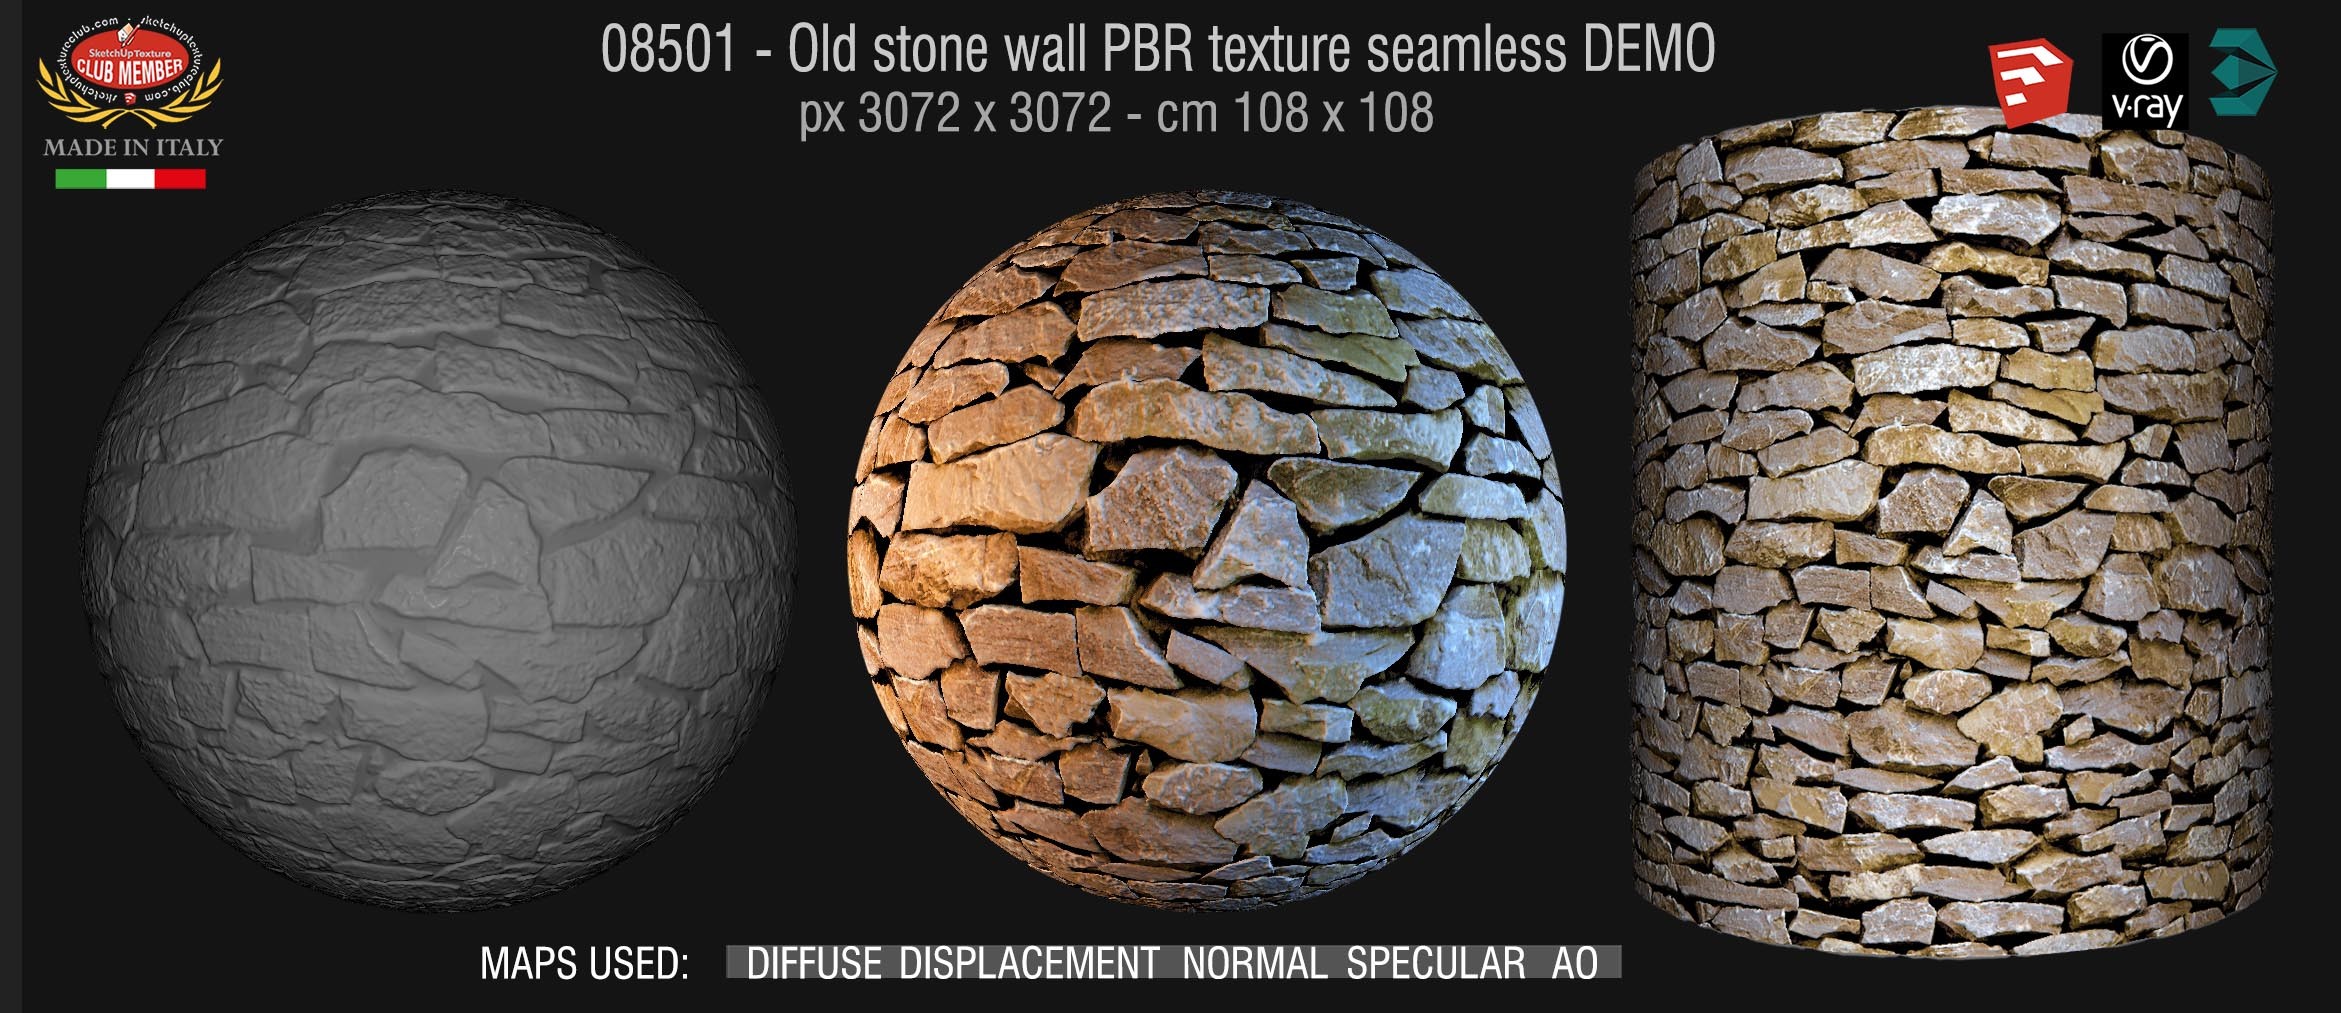 08501 Old stone wall PBR texture seamless DEMO